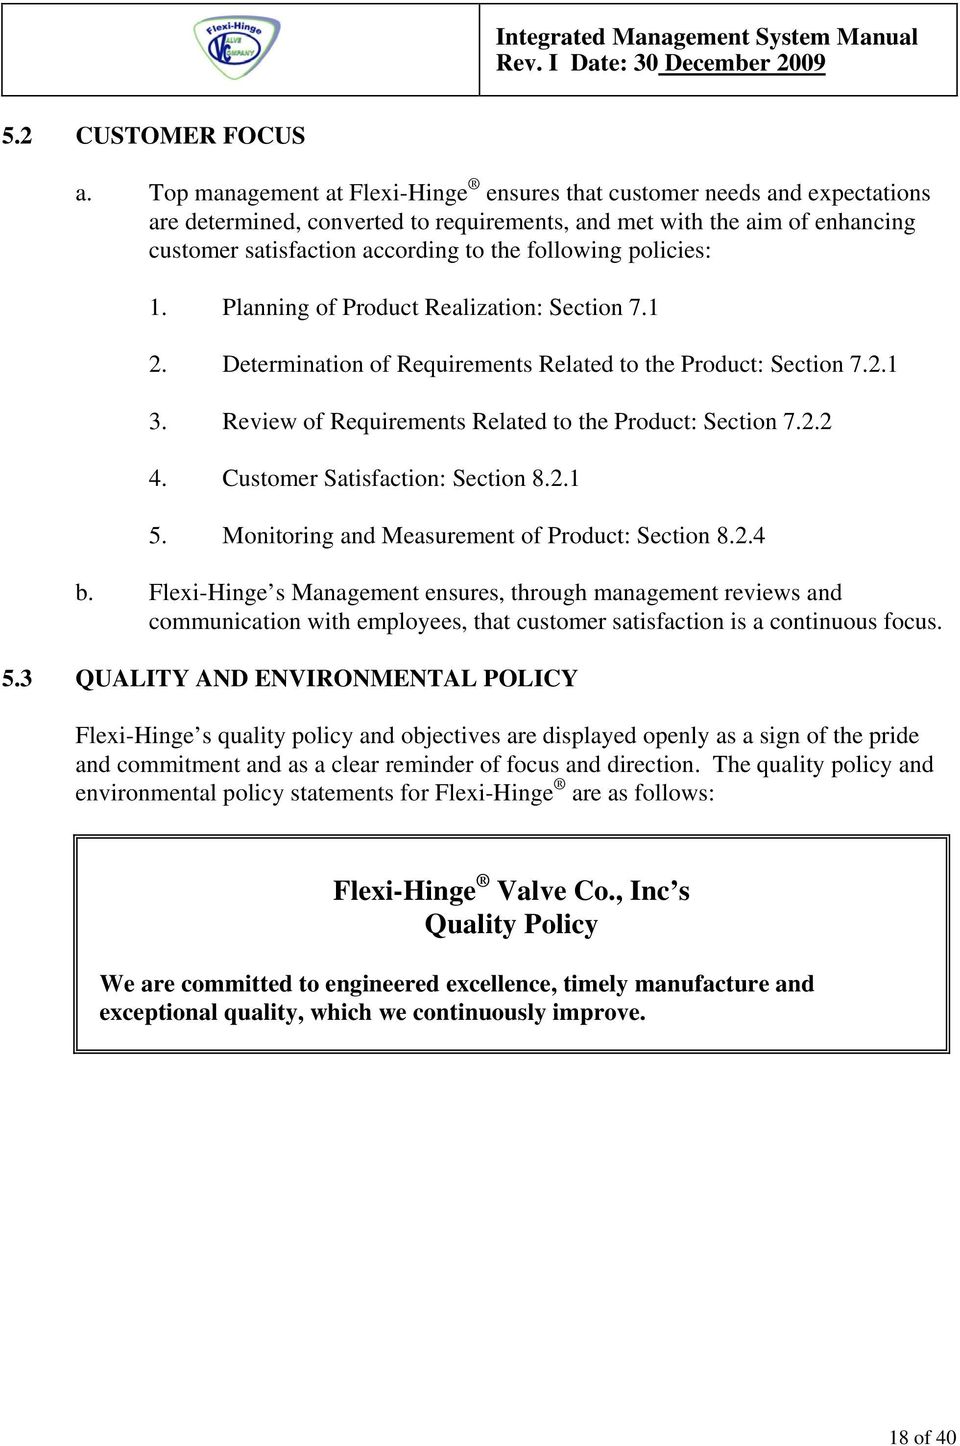 following policies: 1. Planning of Product Realization: Section 7.1 2. Determination of Requirements Related to the Product: Section 7.2.1 3. Review of Requirements Related to the Product: Section 7.